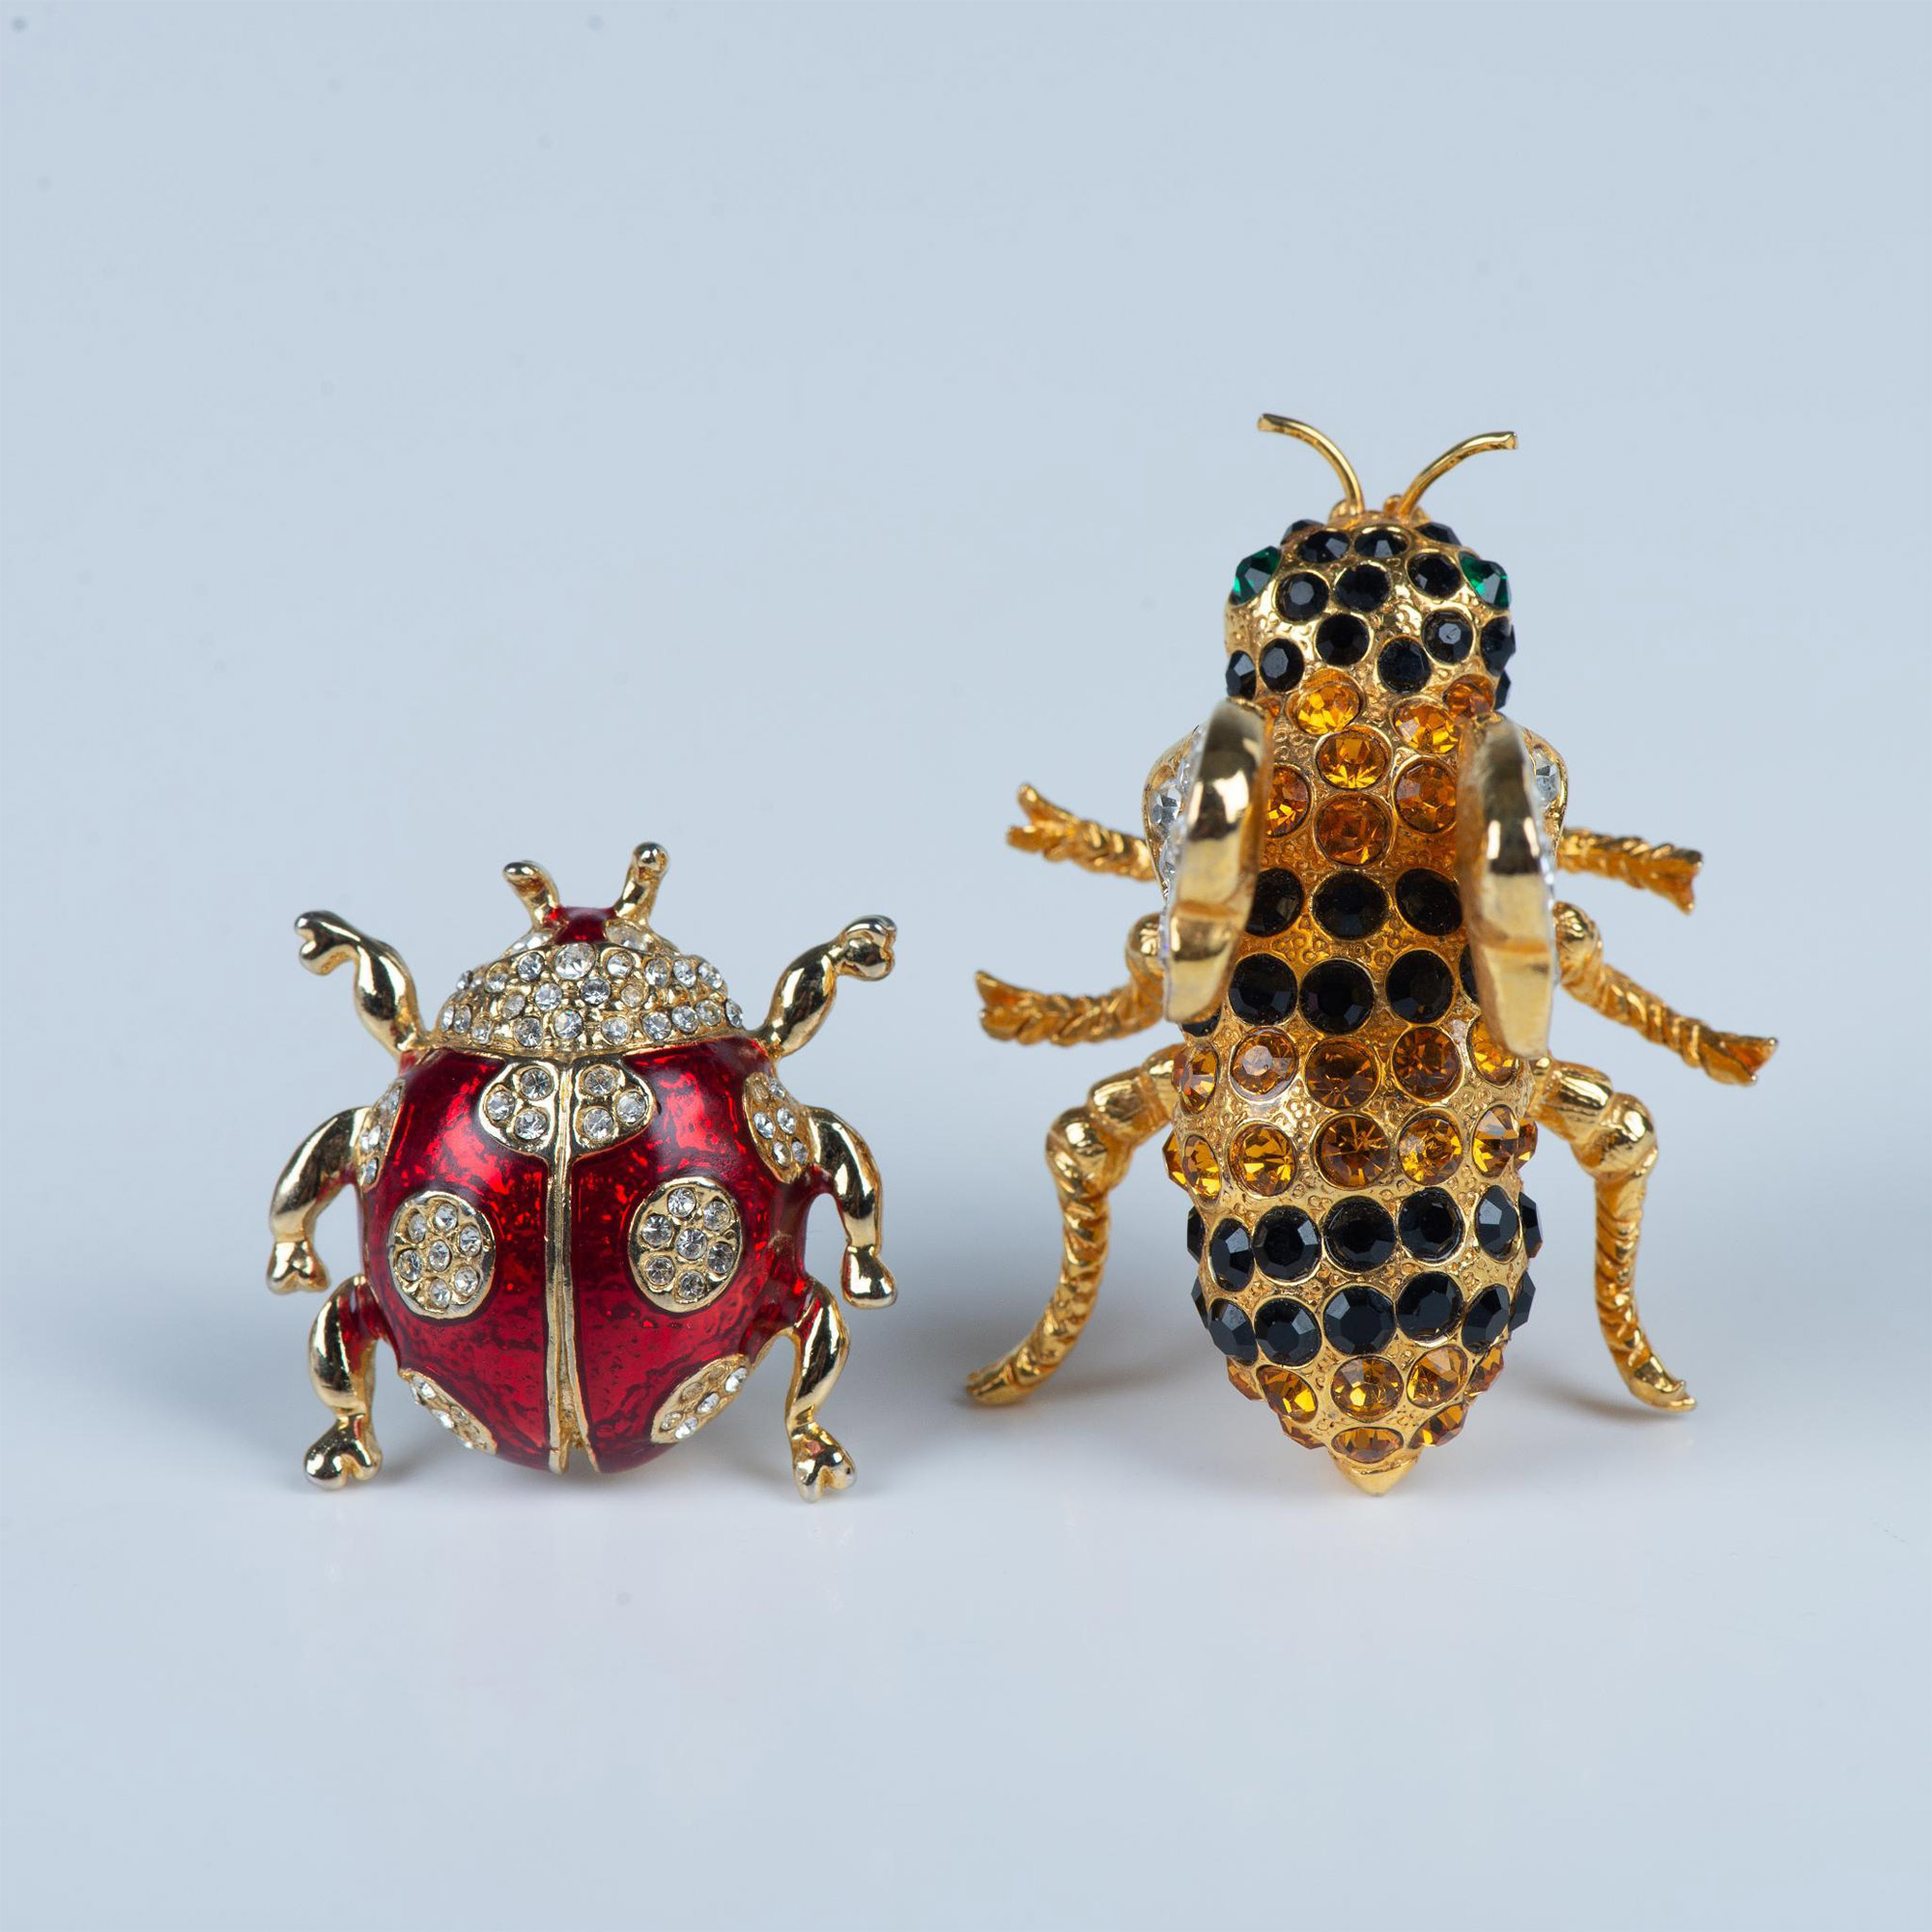 2pc Naturalistic 3D Bumblebee & Ladybug Insect Brooches - Image 3 of 7